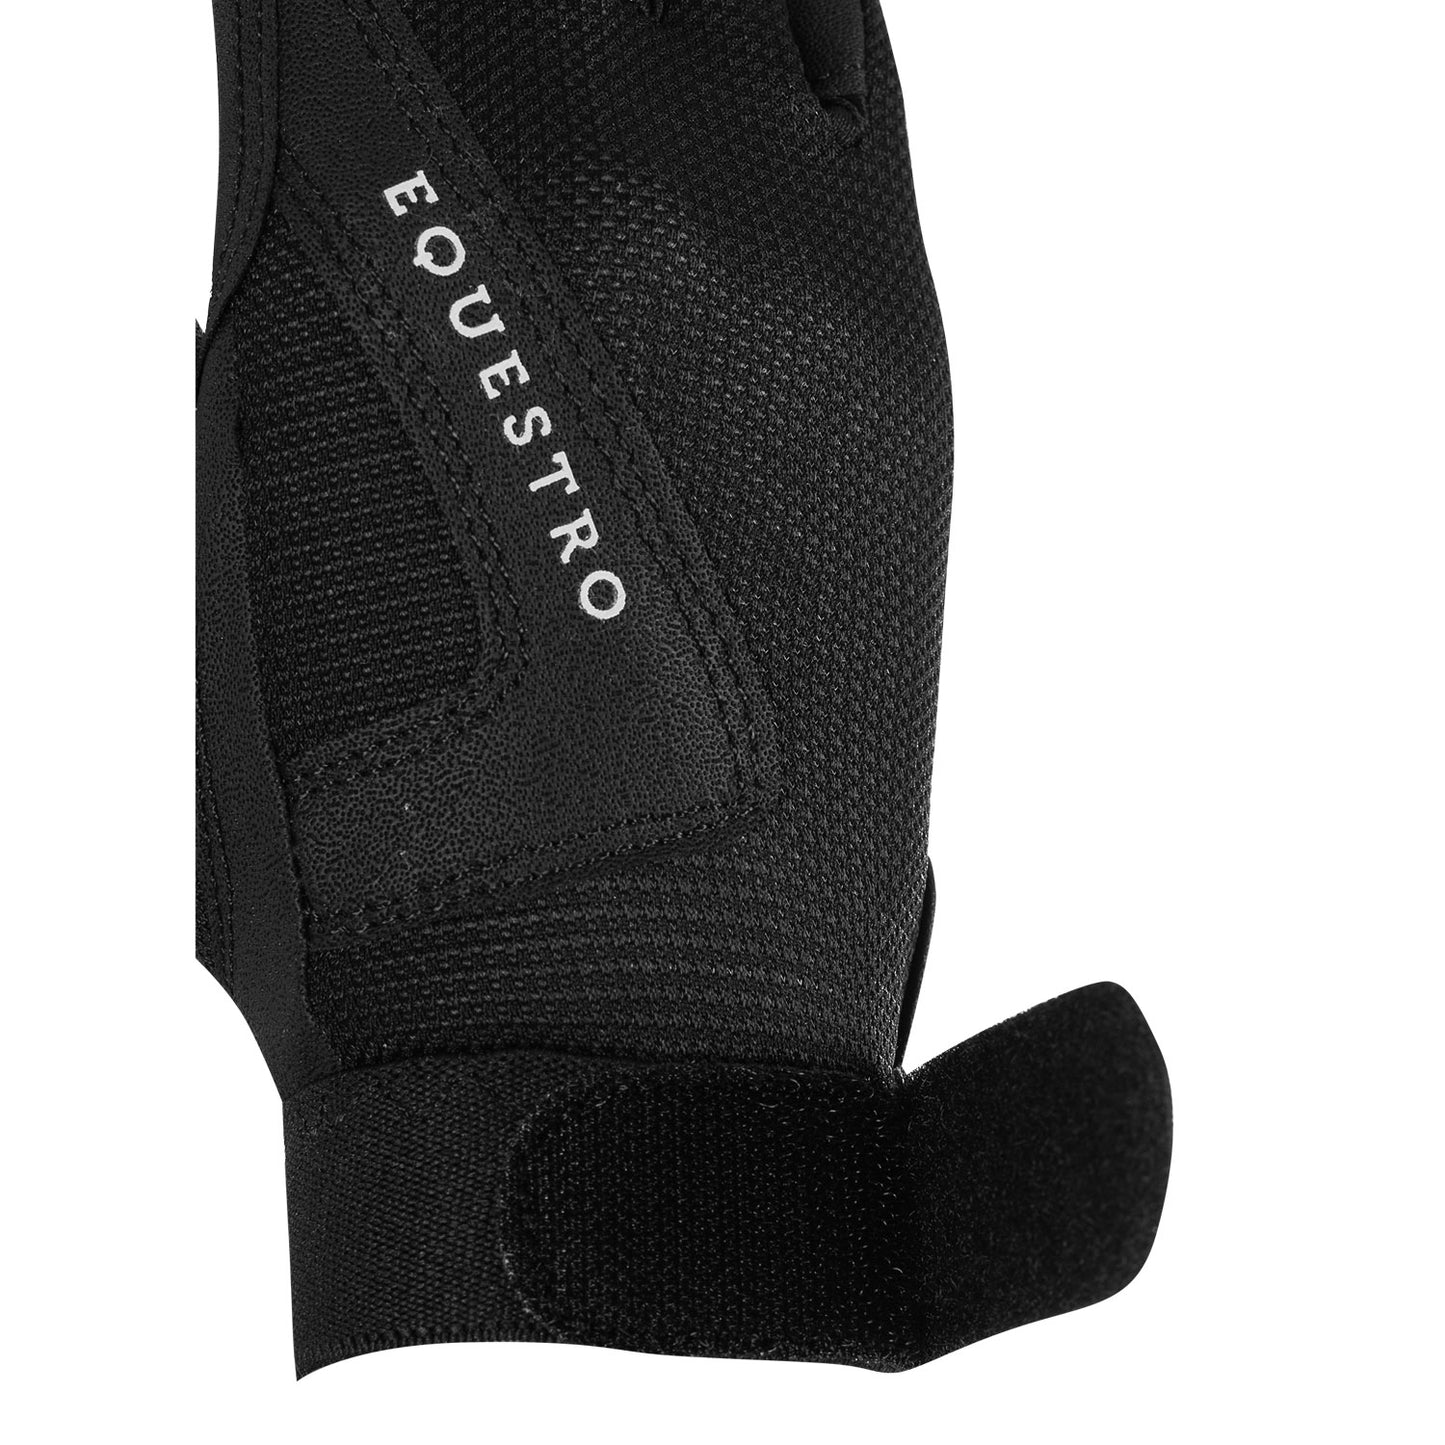 EQUESTRO - Gloves in Technical Fabric